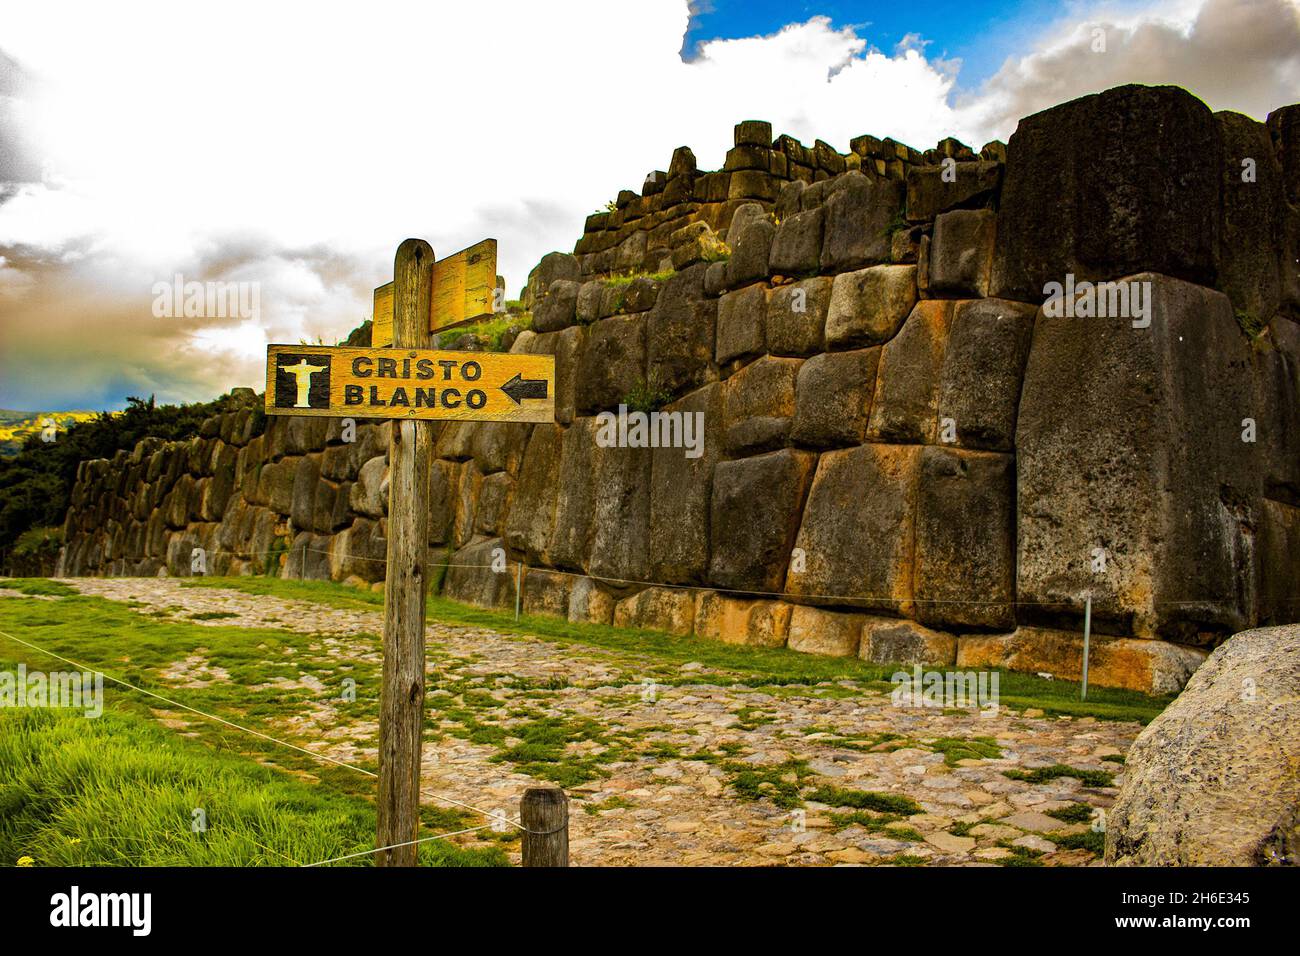 Wooden sign with the name Cristo Blanco. The observation deck in Peru. Stock Photo